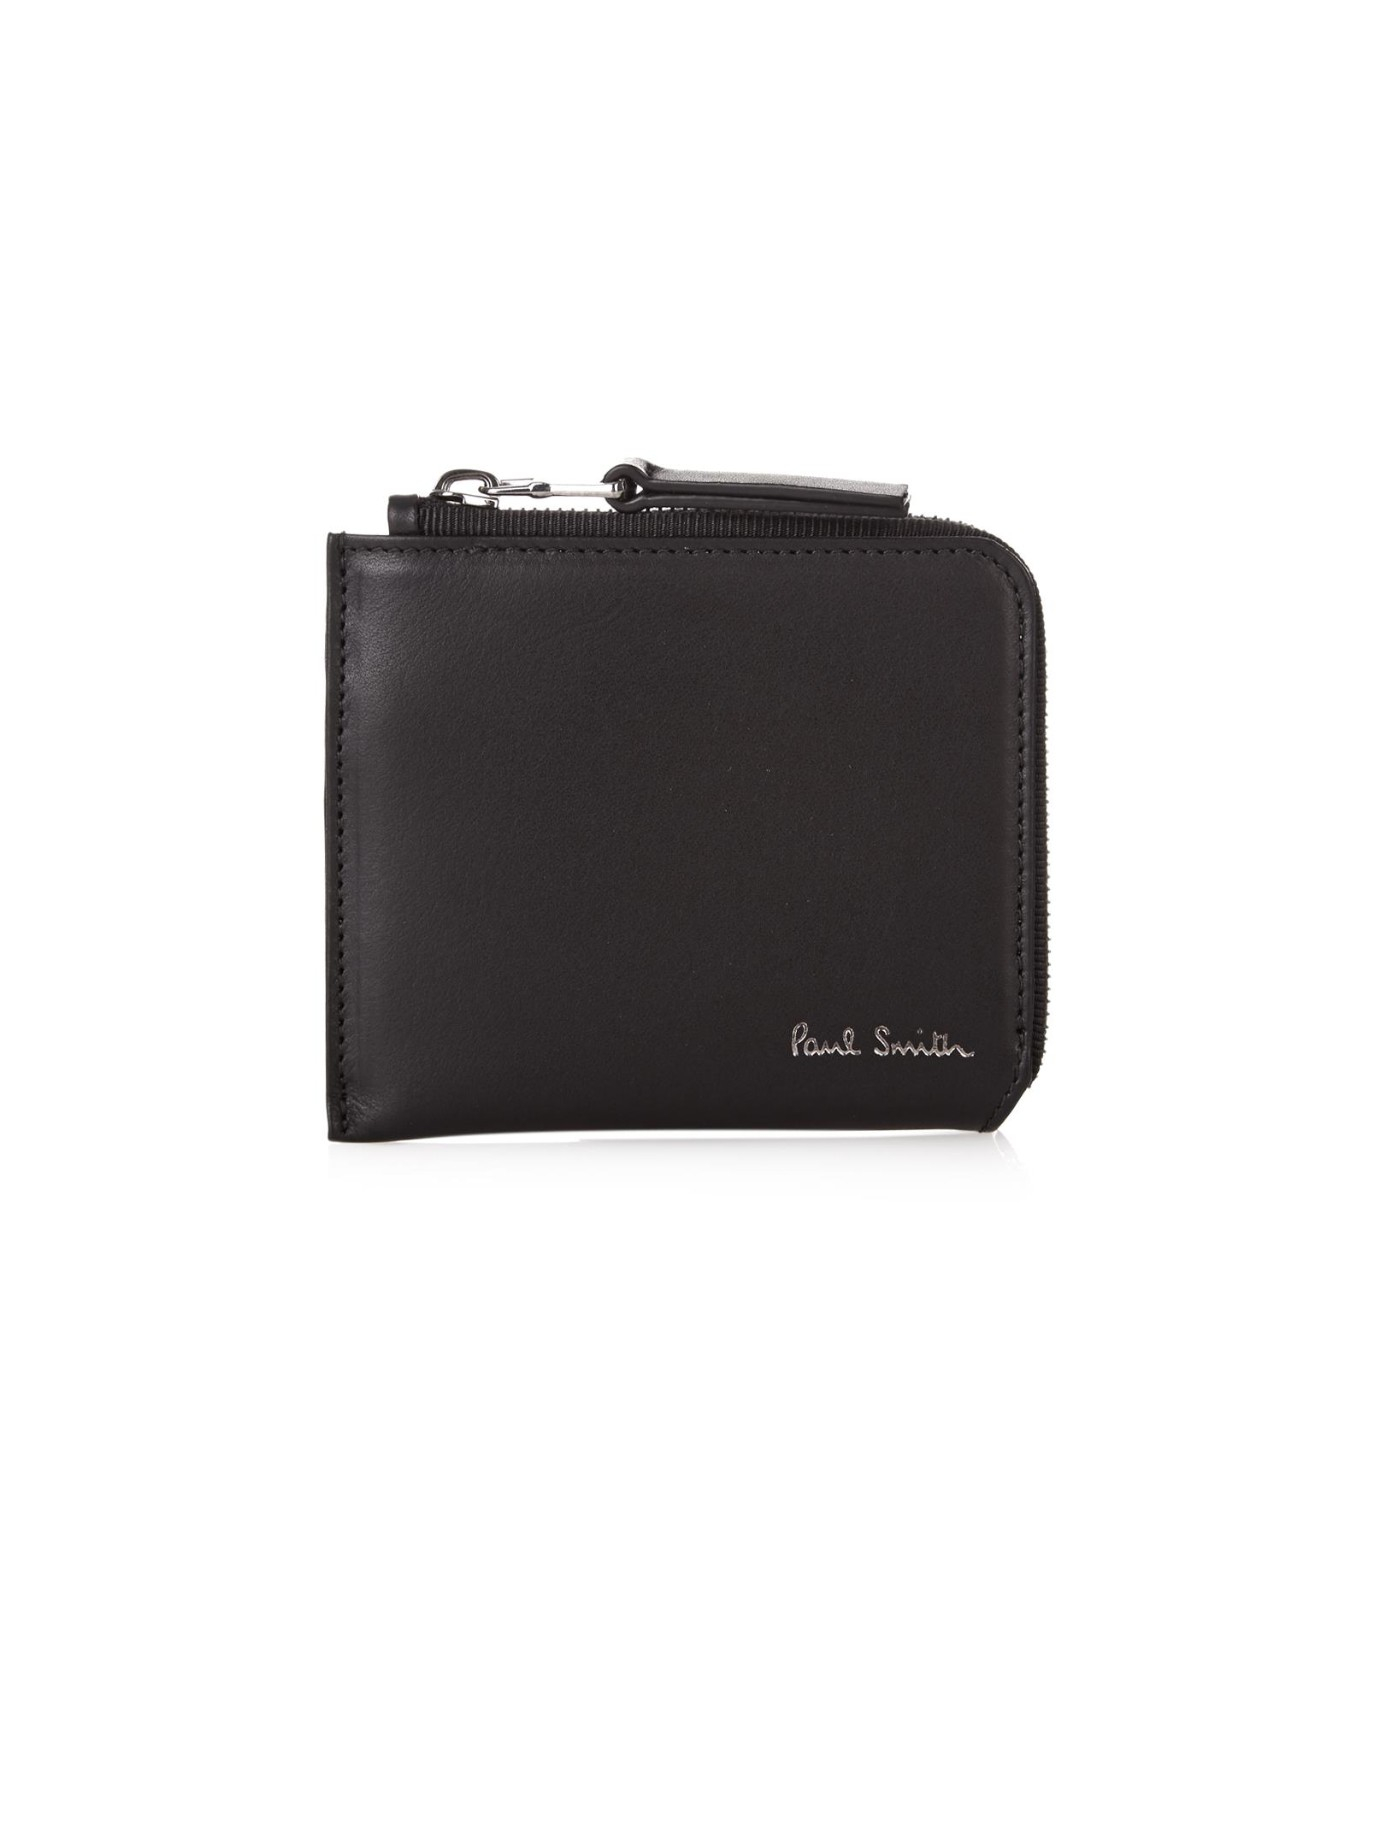 Paul Smith Zip-Around Leather Wallet in Black for Men | Lyst